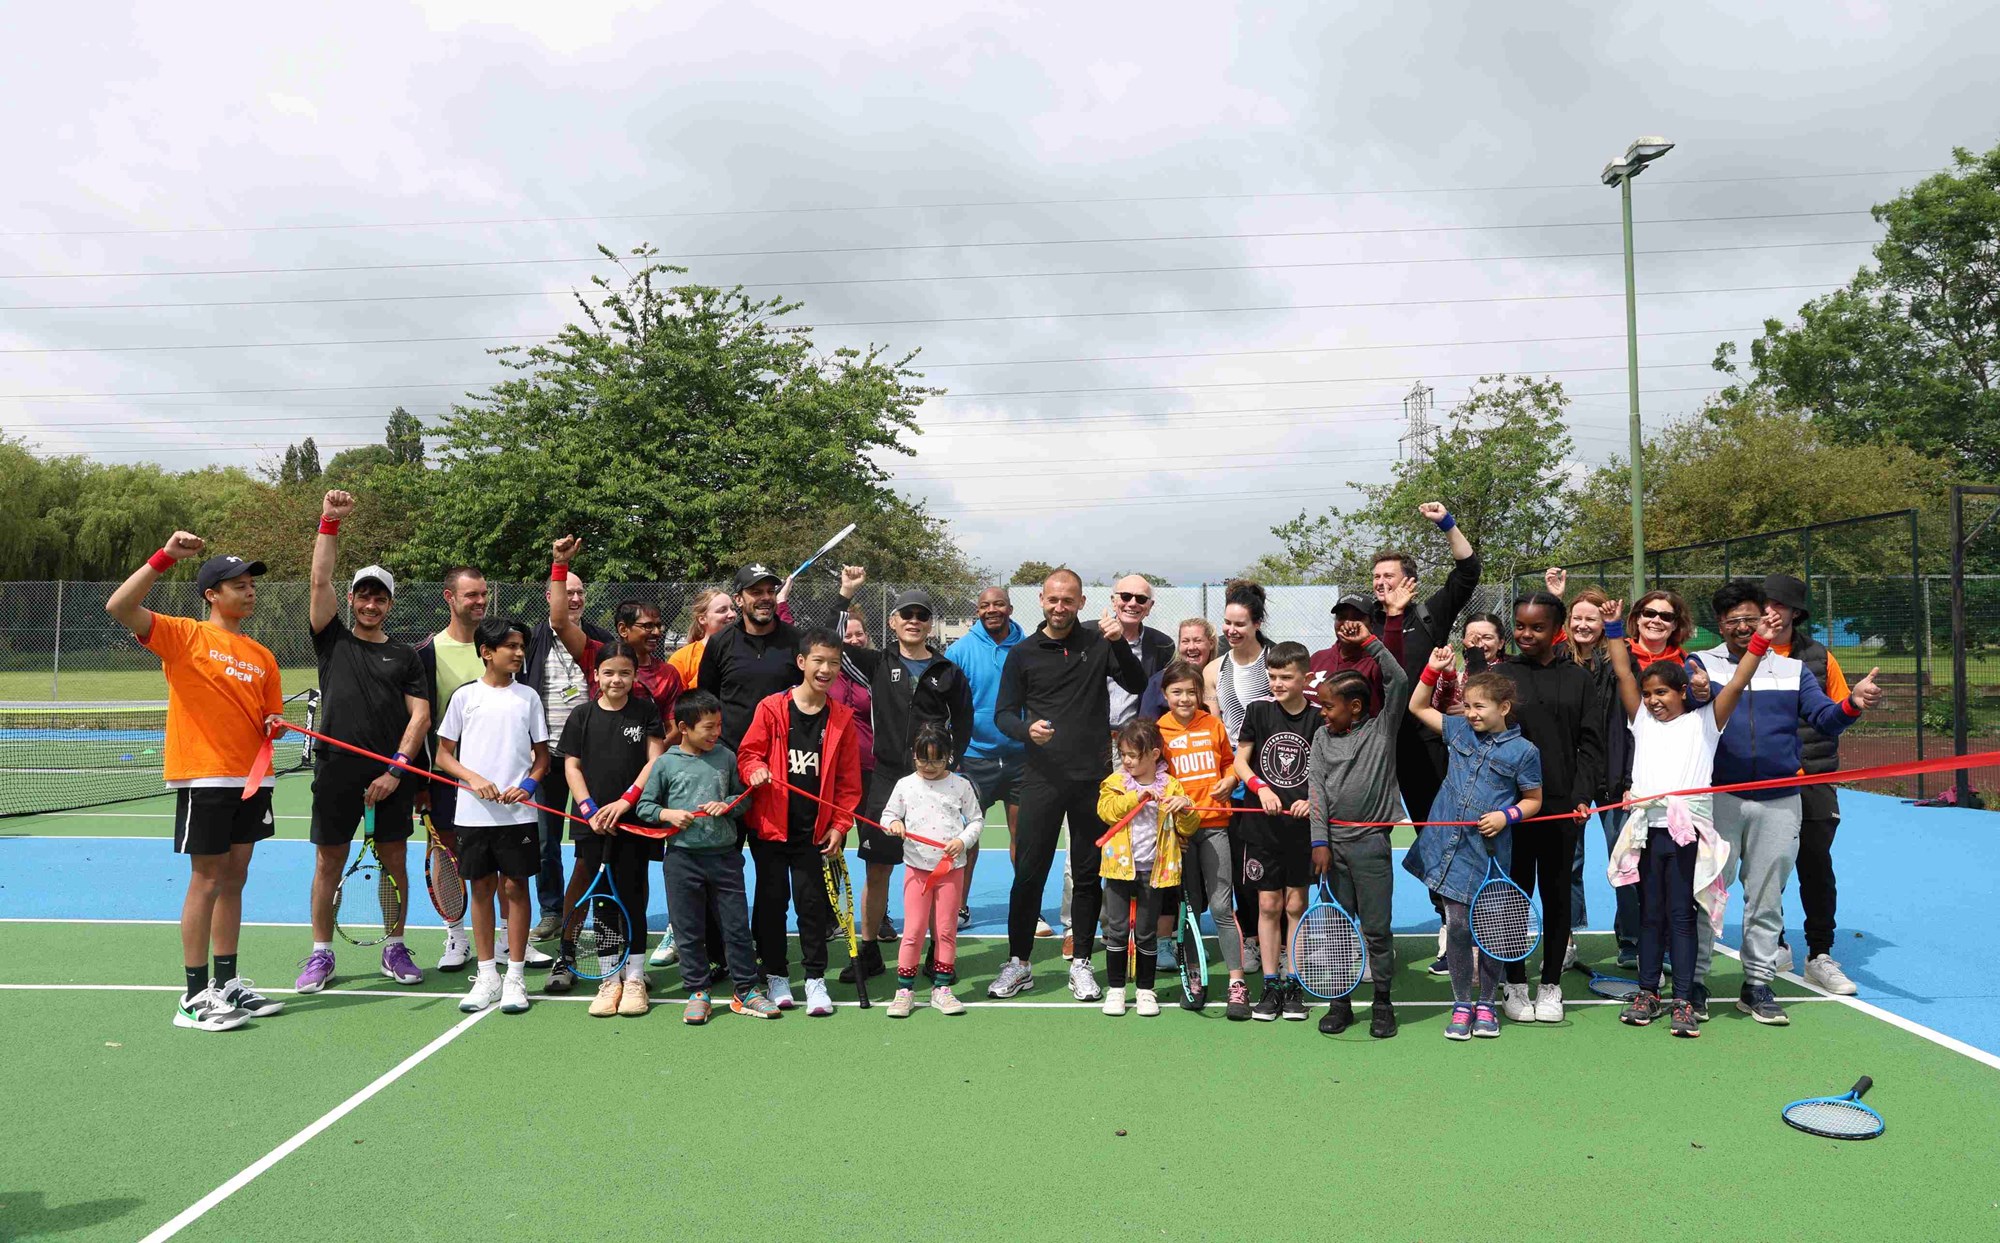 British tennis star Dan Evans surrounded by adults and children on a park tennis court after a Free Parks Tennis session